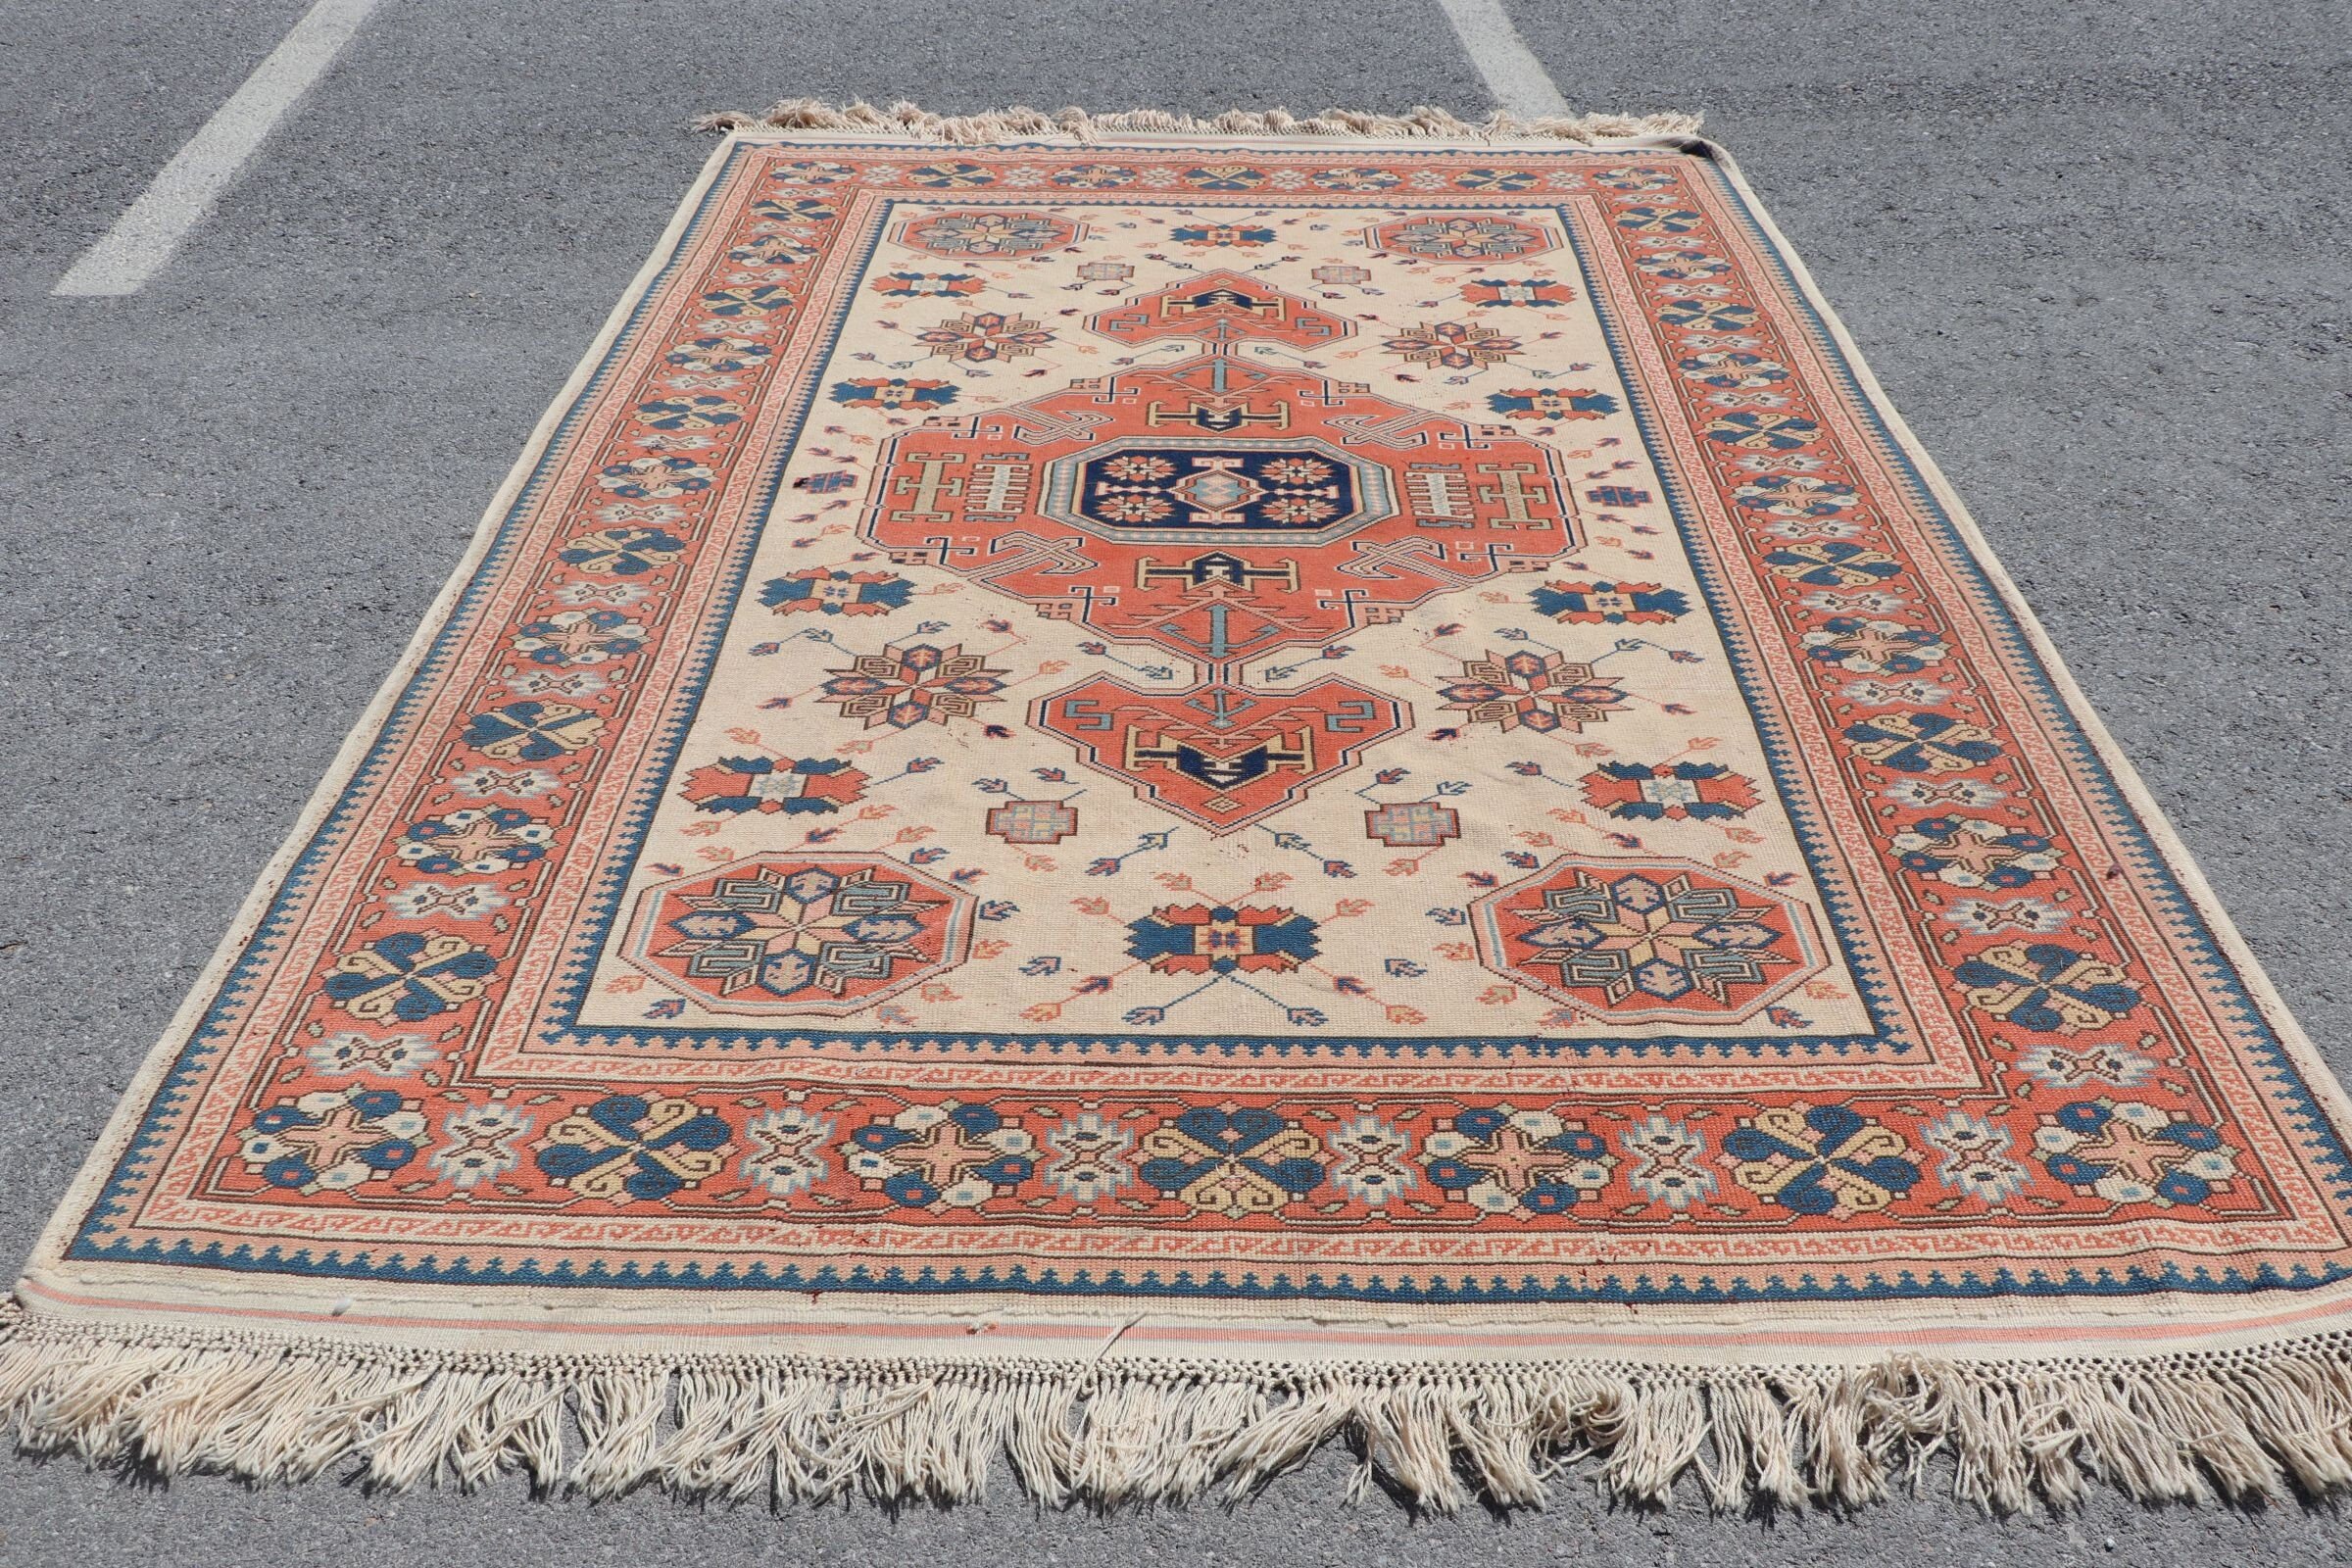 6.7x9.4 ft Large Rug, Anatolian Rug, Turkish Rug, Vintage Rugs, Dining Room Rugs, Old Rug, Red Bedroom Rugs, Rugs for Salon